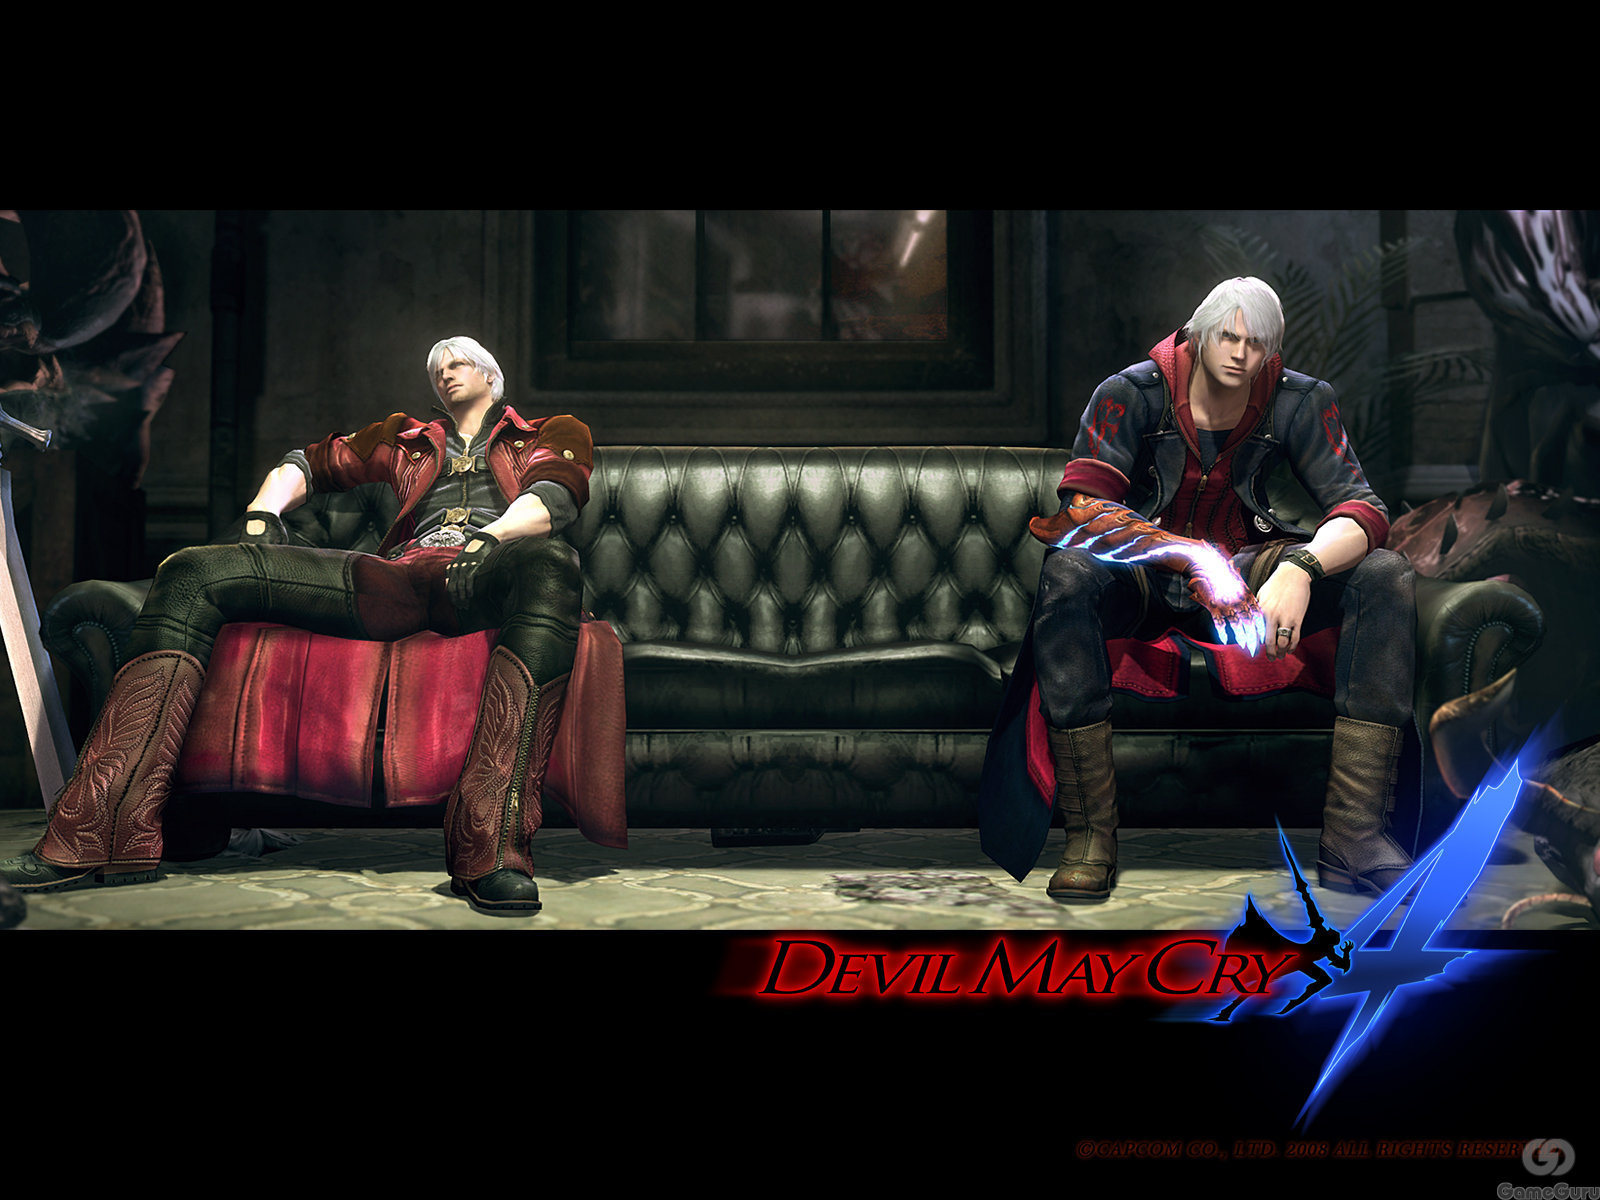 18019 Screensavers and Wallpapers Devil May Cry for phone. Download games, devil may cry, black pictures for free